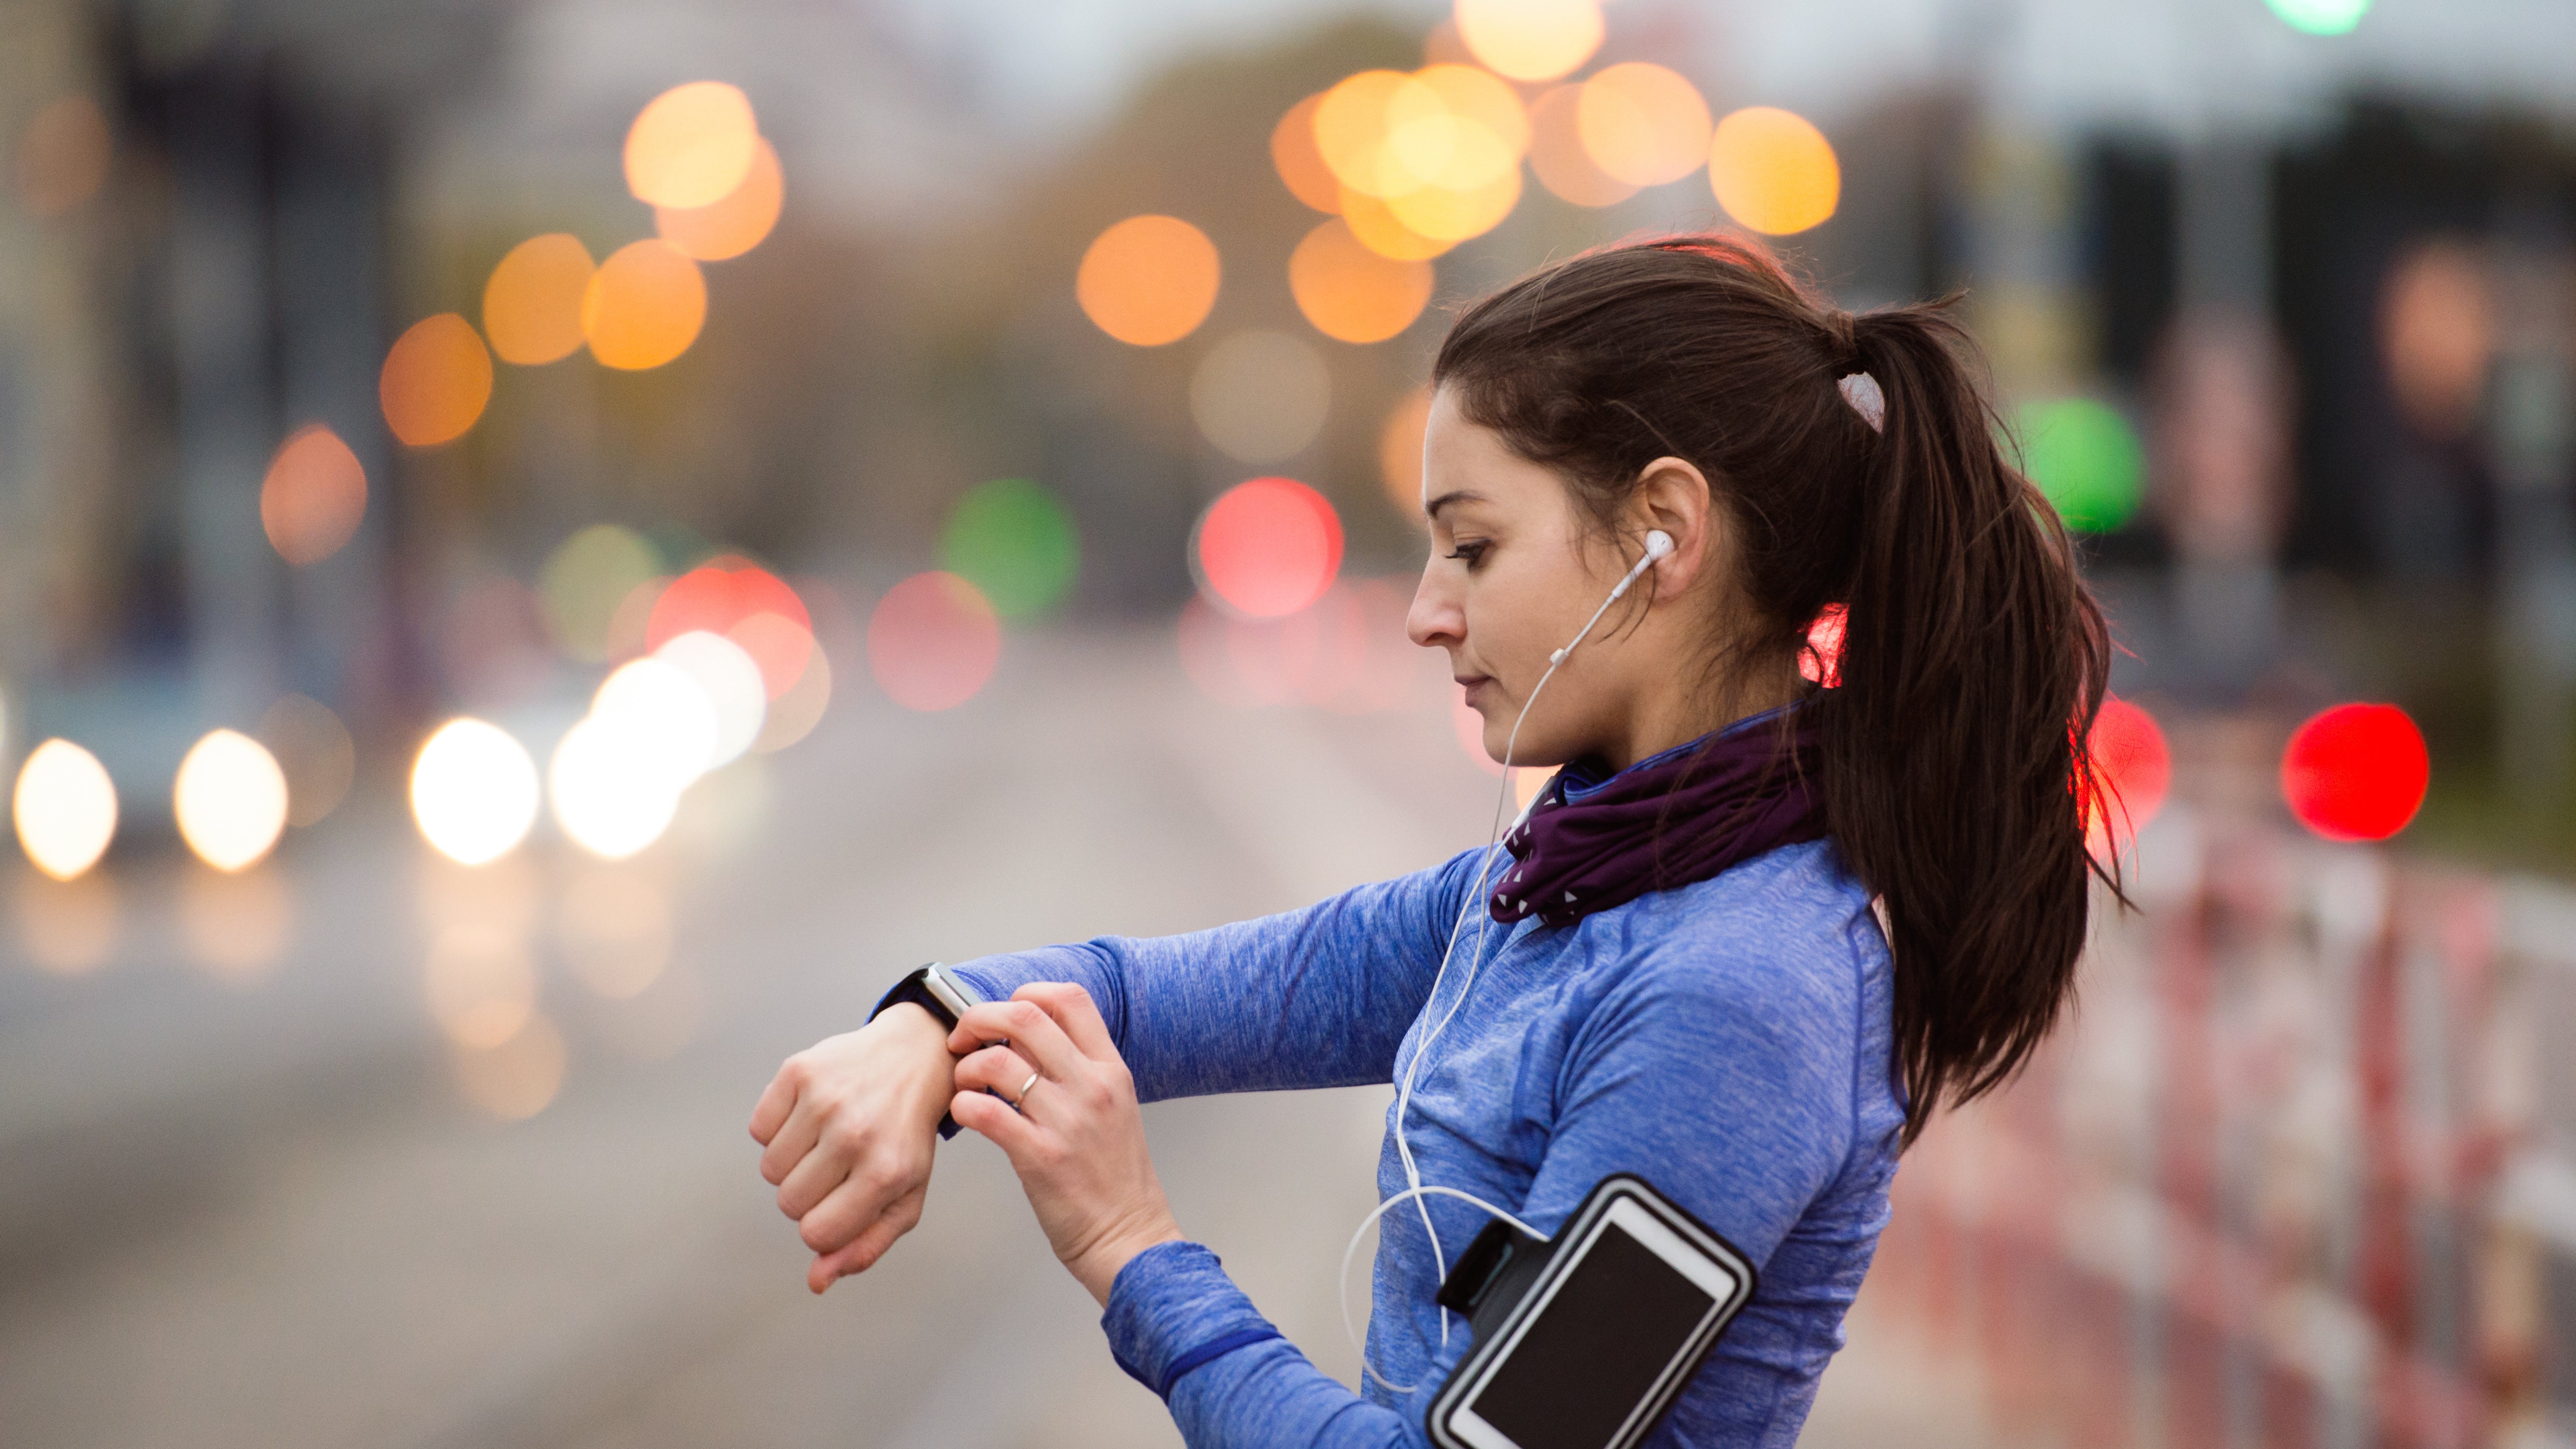 Using physical activity as measured by wearable sensors